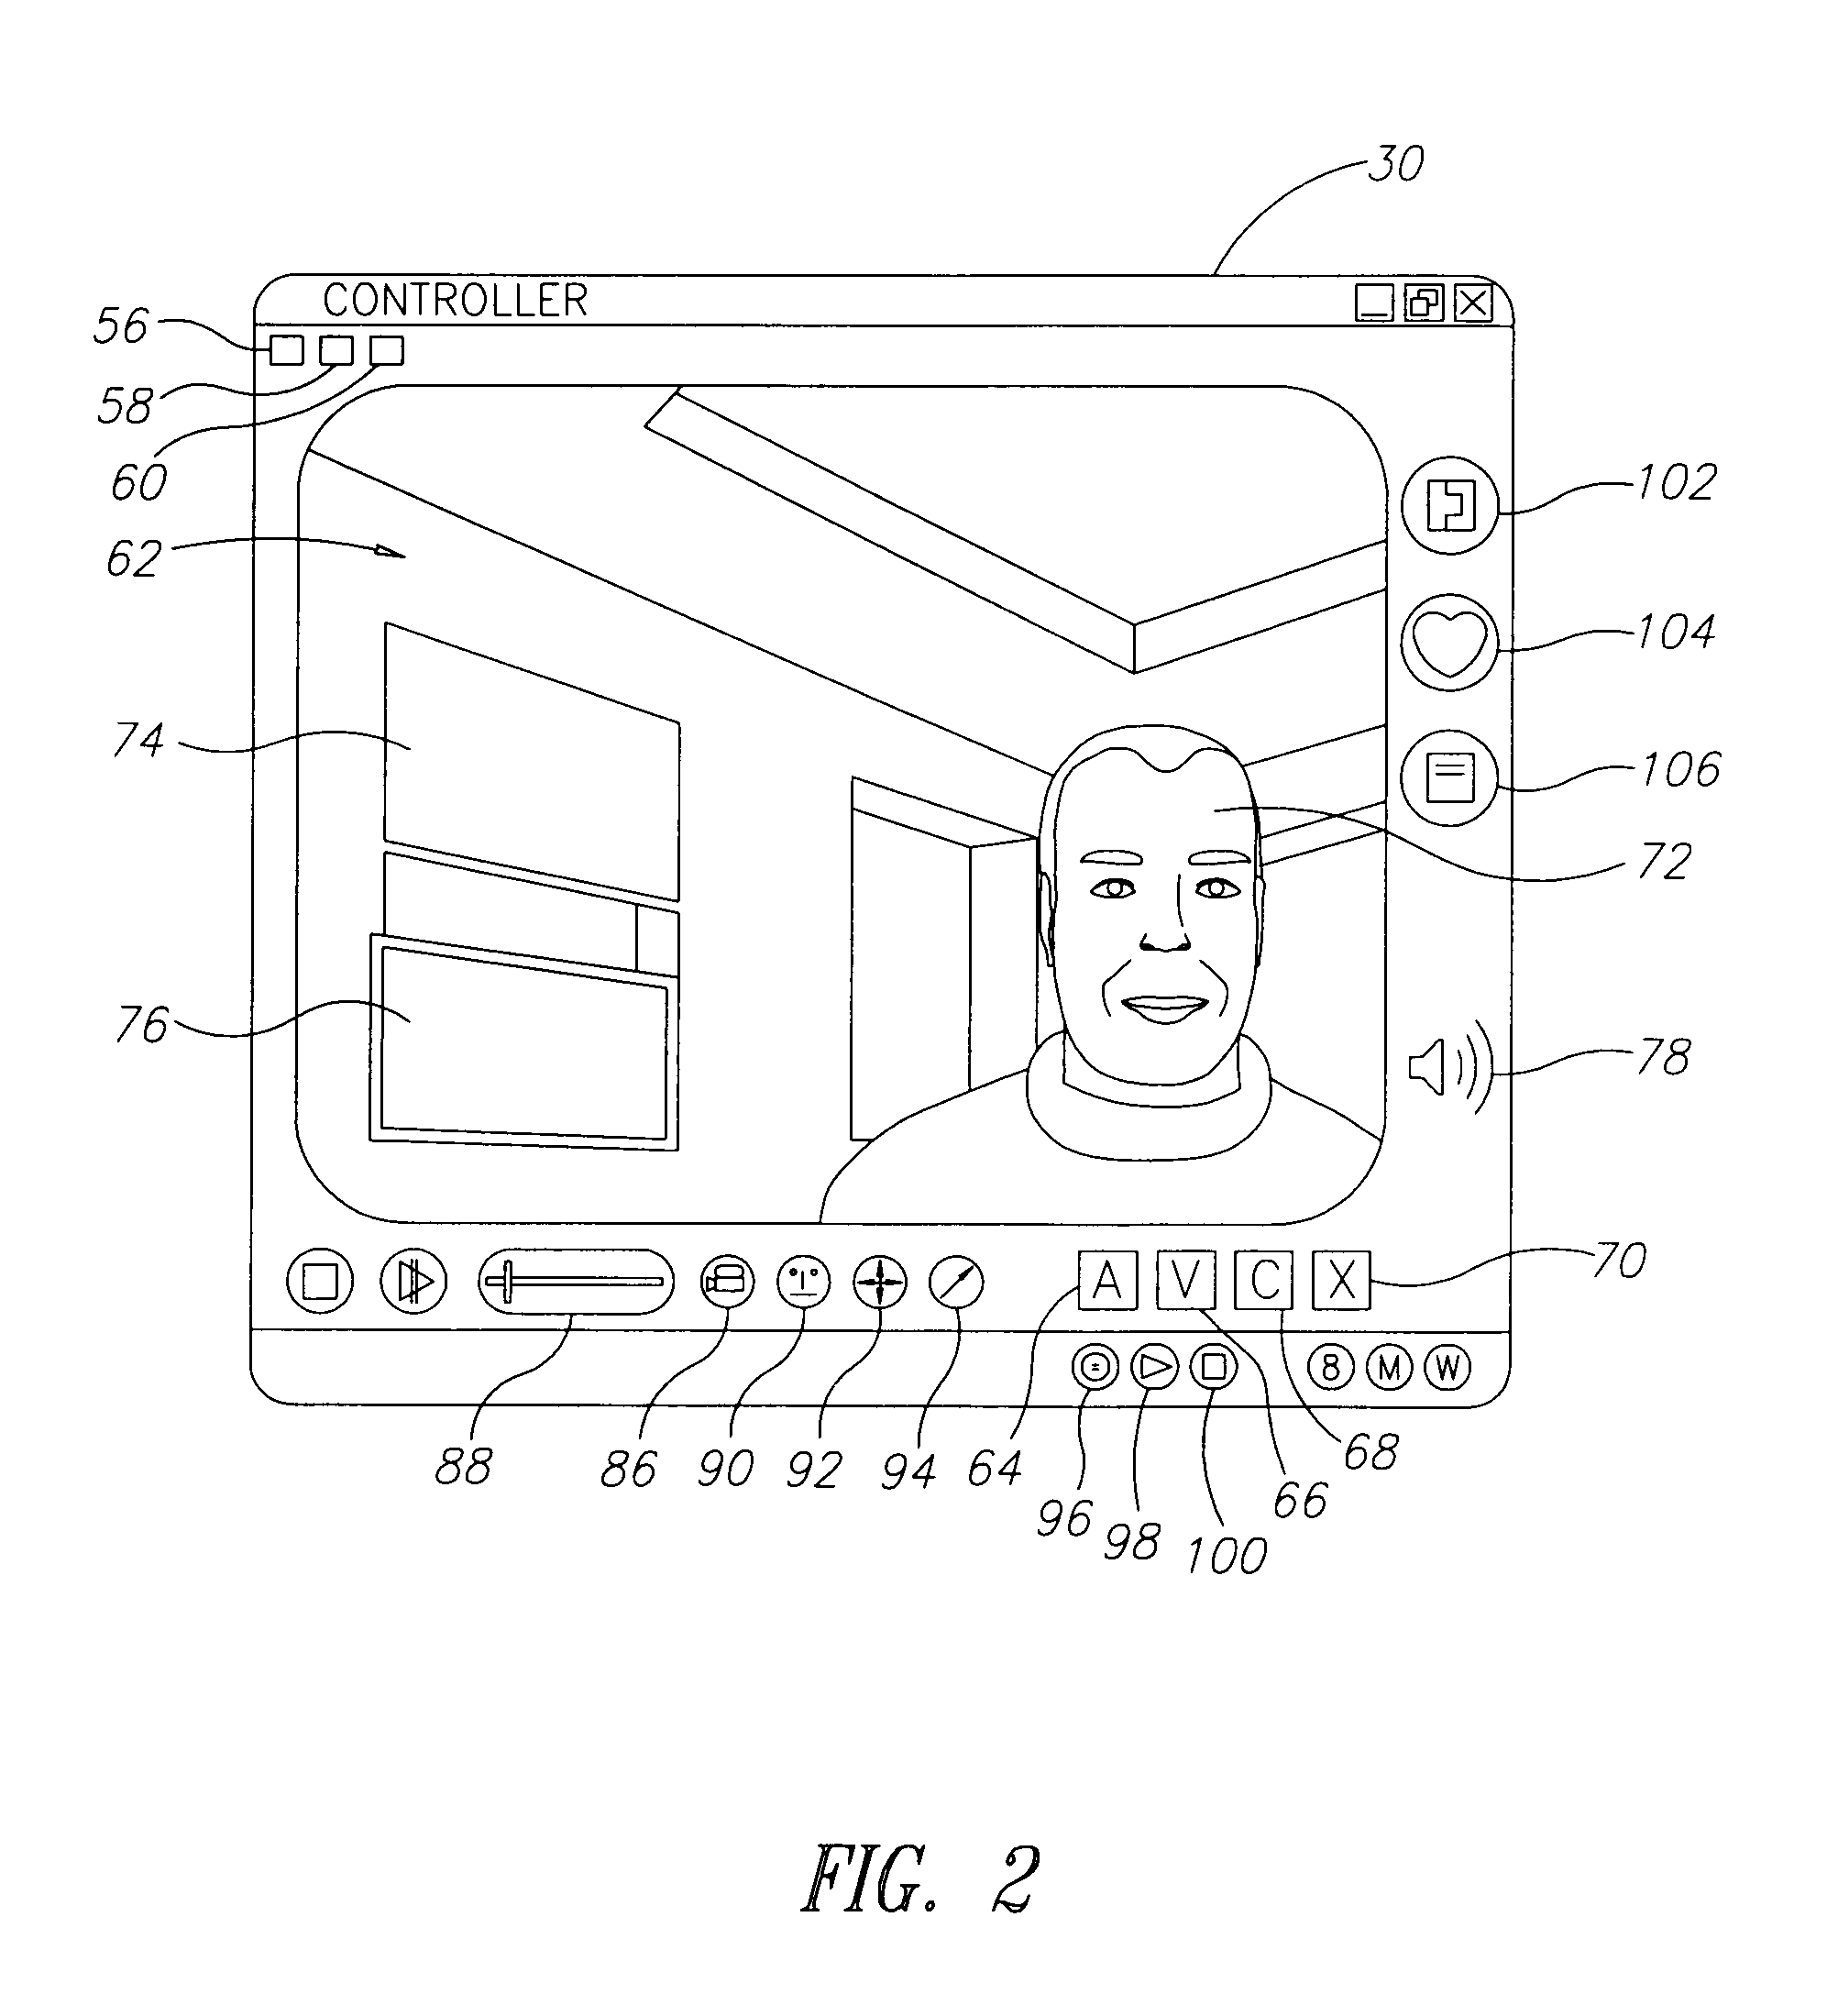 Communication system and method including rich media tools